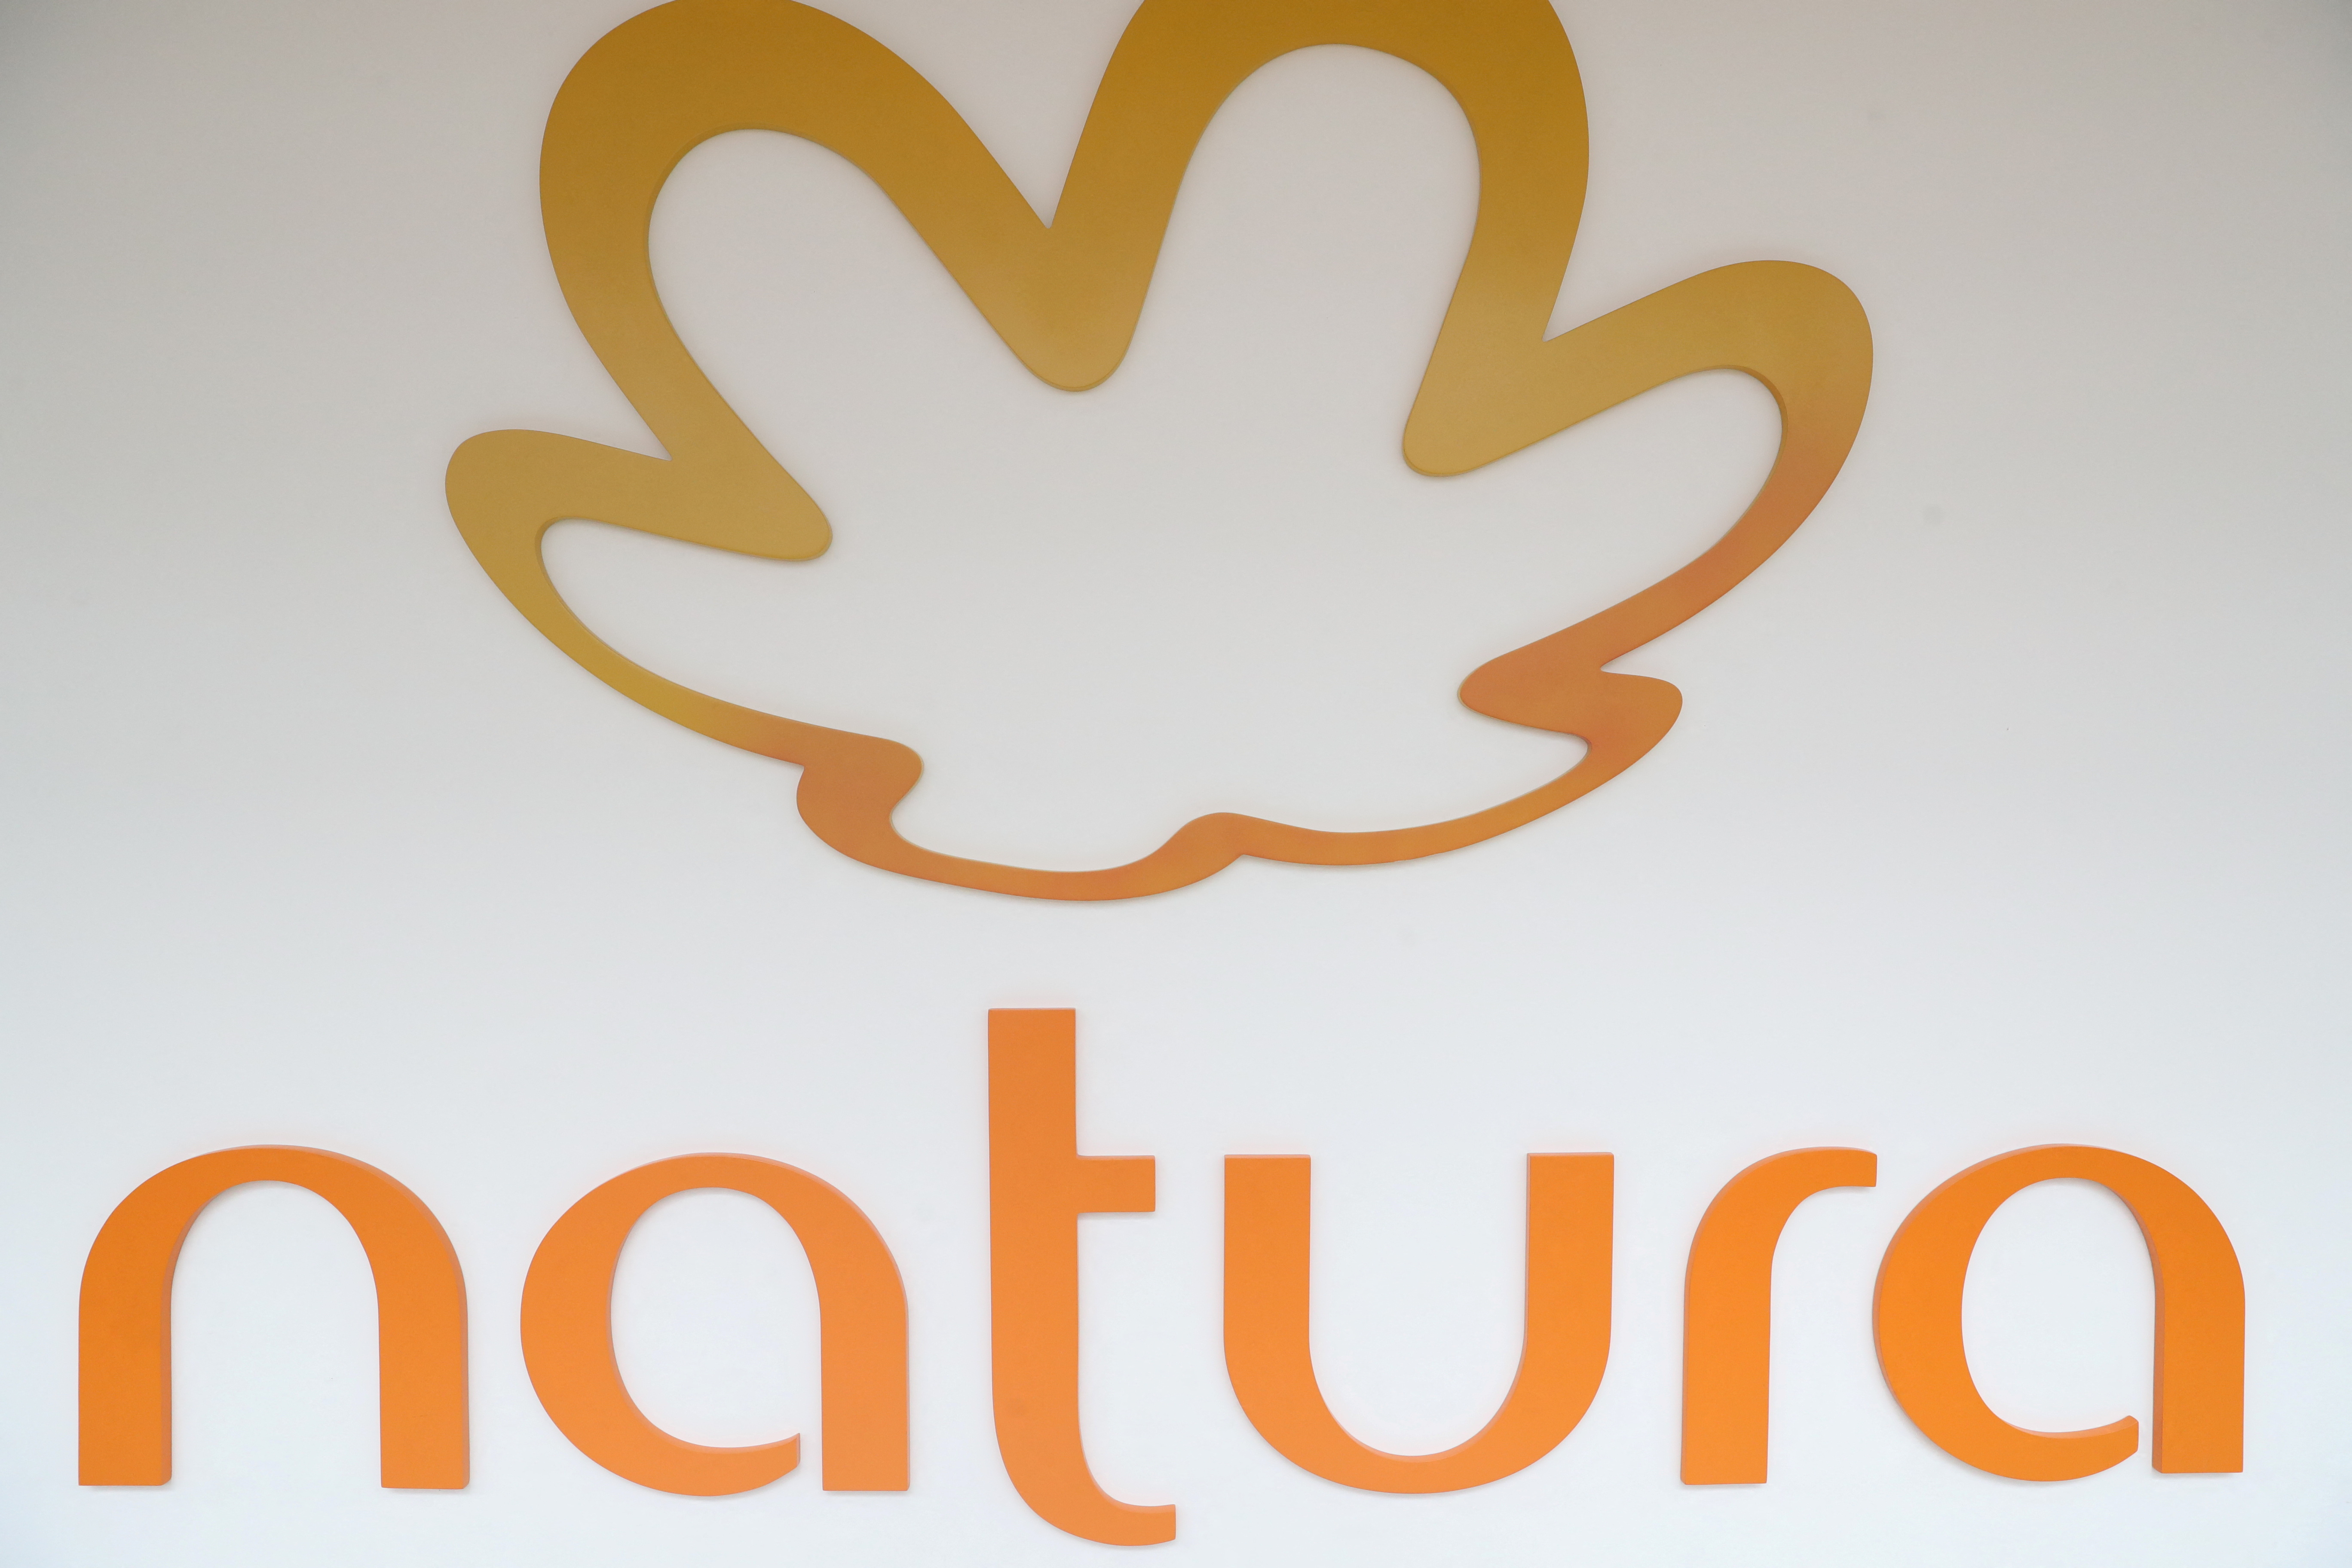 The logo of Natura is picture at the company headquarters in Sao Paulo